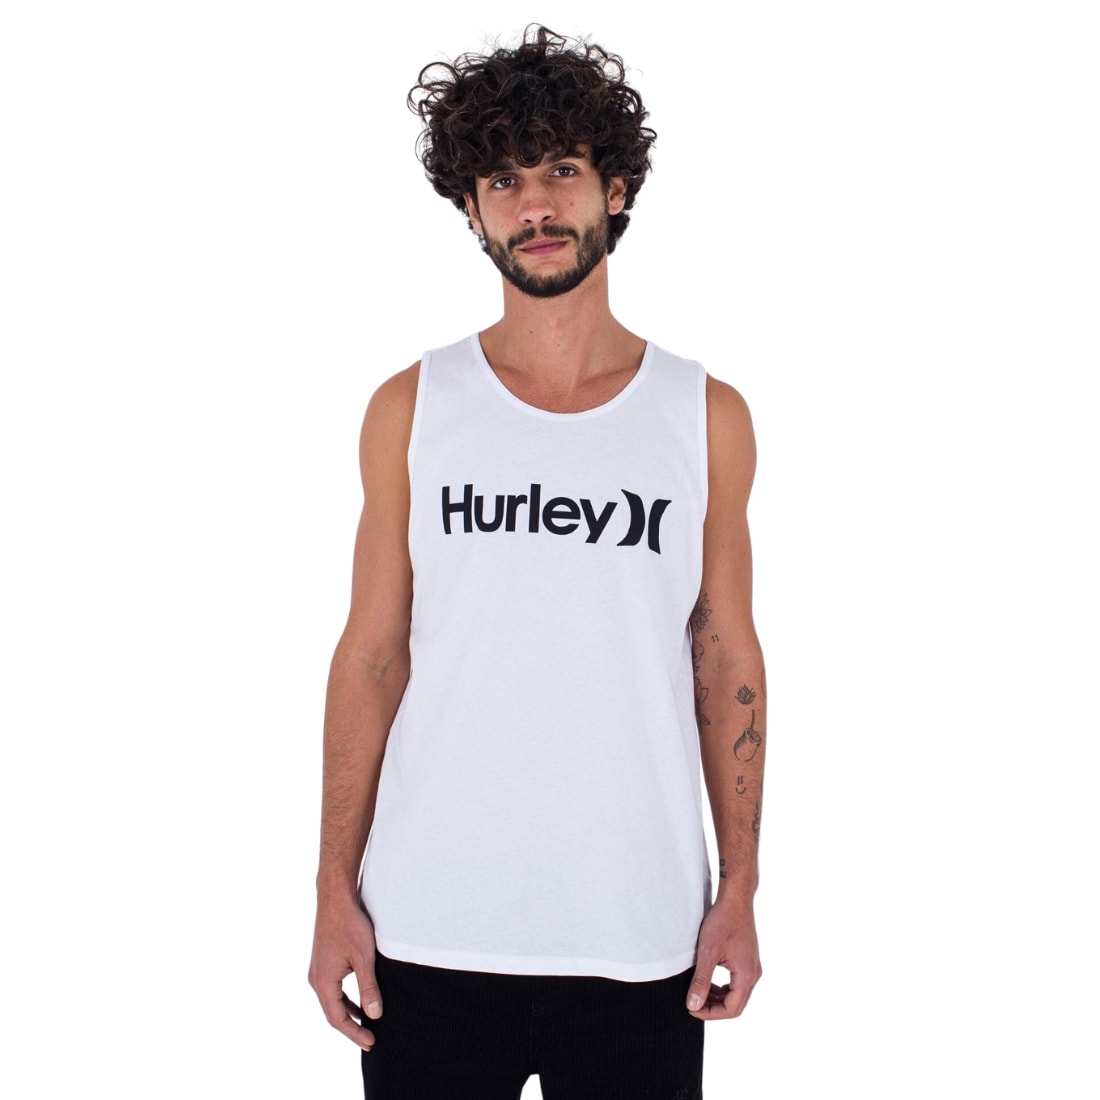 Hurley Everyday One &amp; Only Solid Tank Top Vest - White - Mens Surf Brand Vest/Tank Top by Hurley